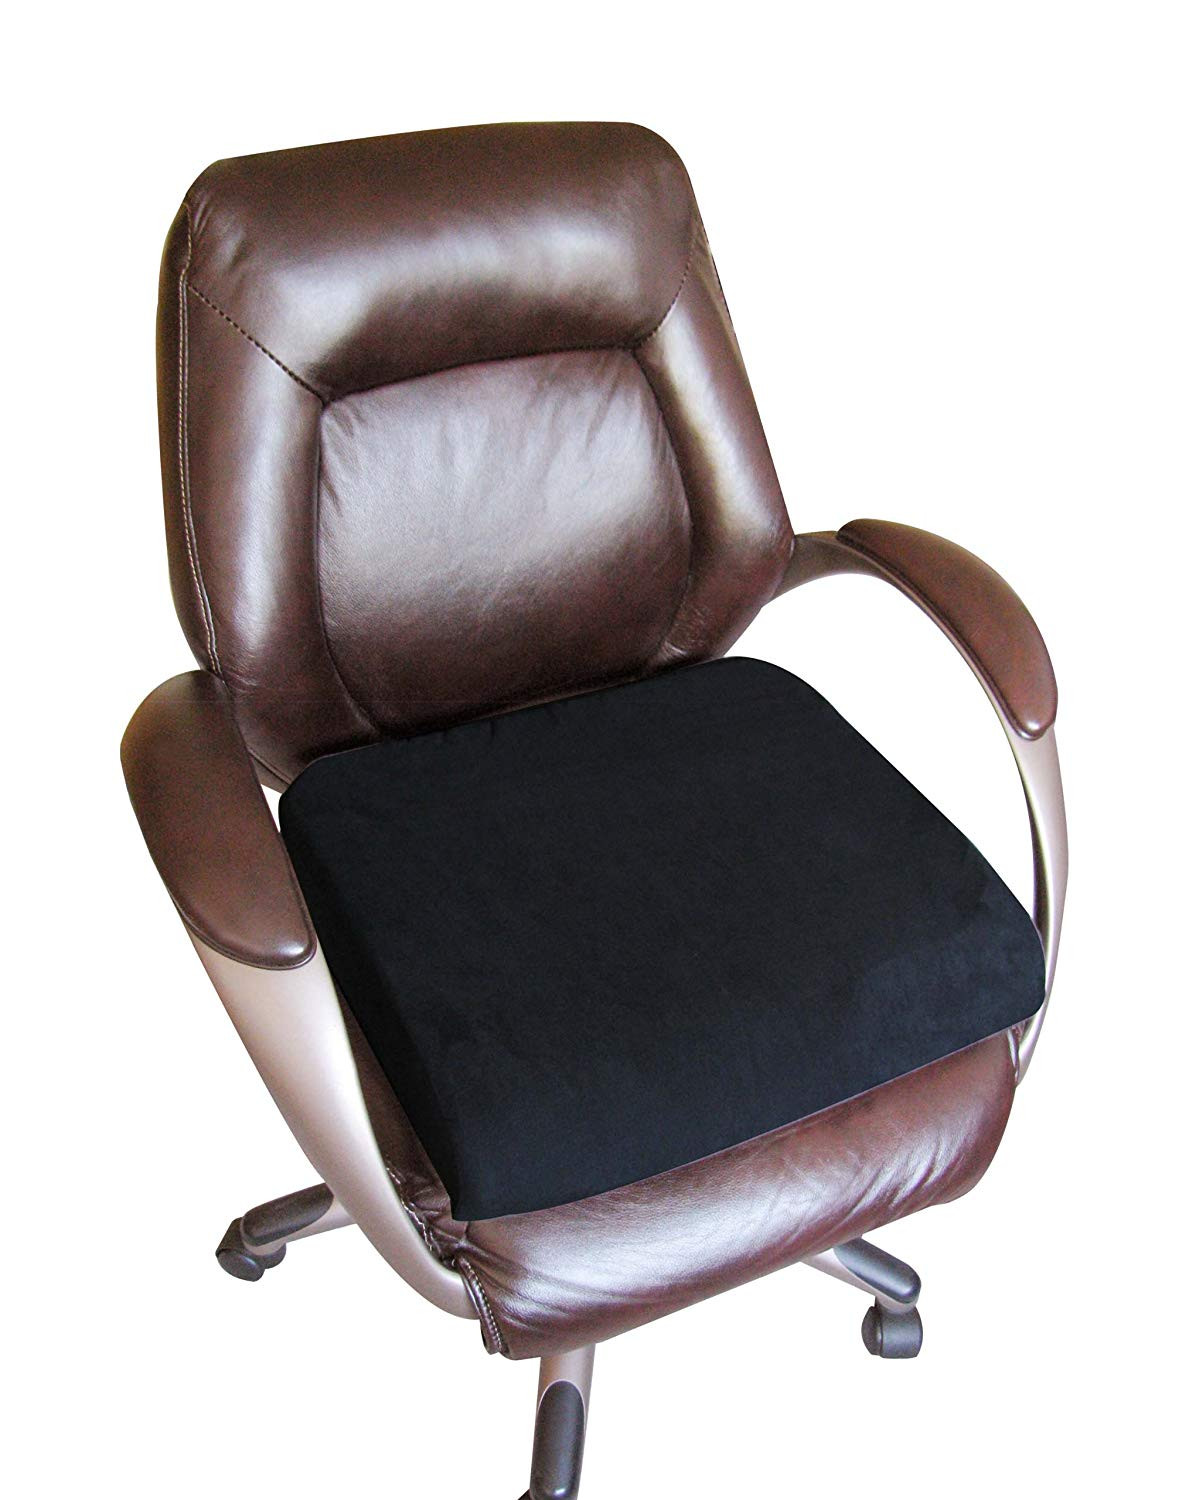 Best ideas about Desk Chair Cushion
. Save or Pin 5 Top Best fice Chair Cushions That Are fortable Now.